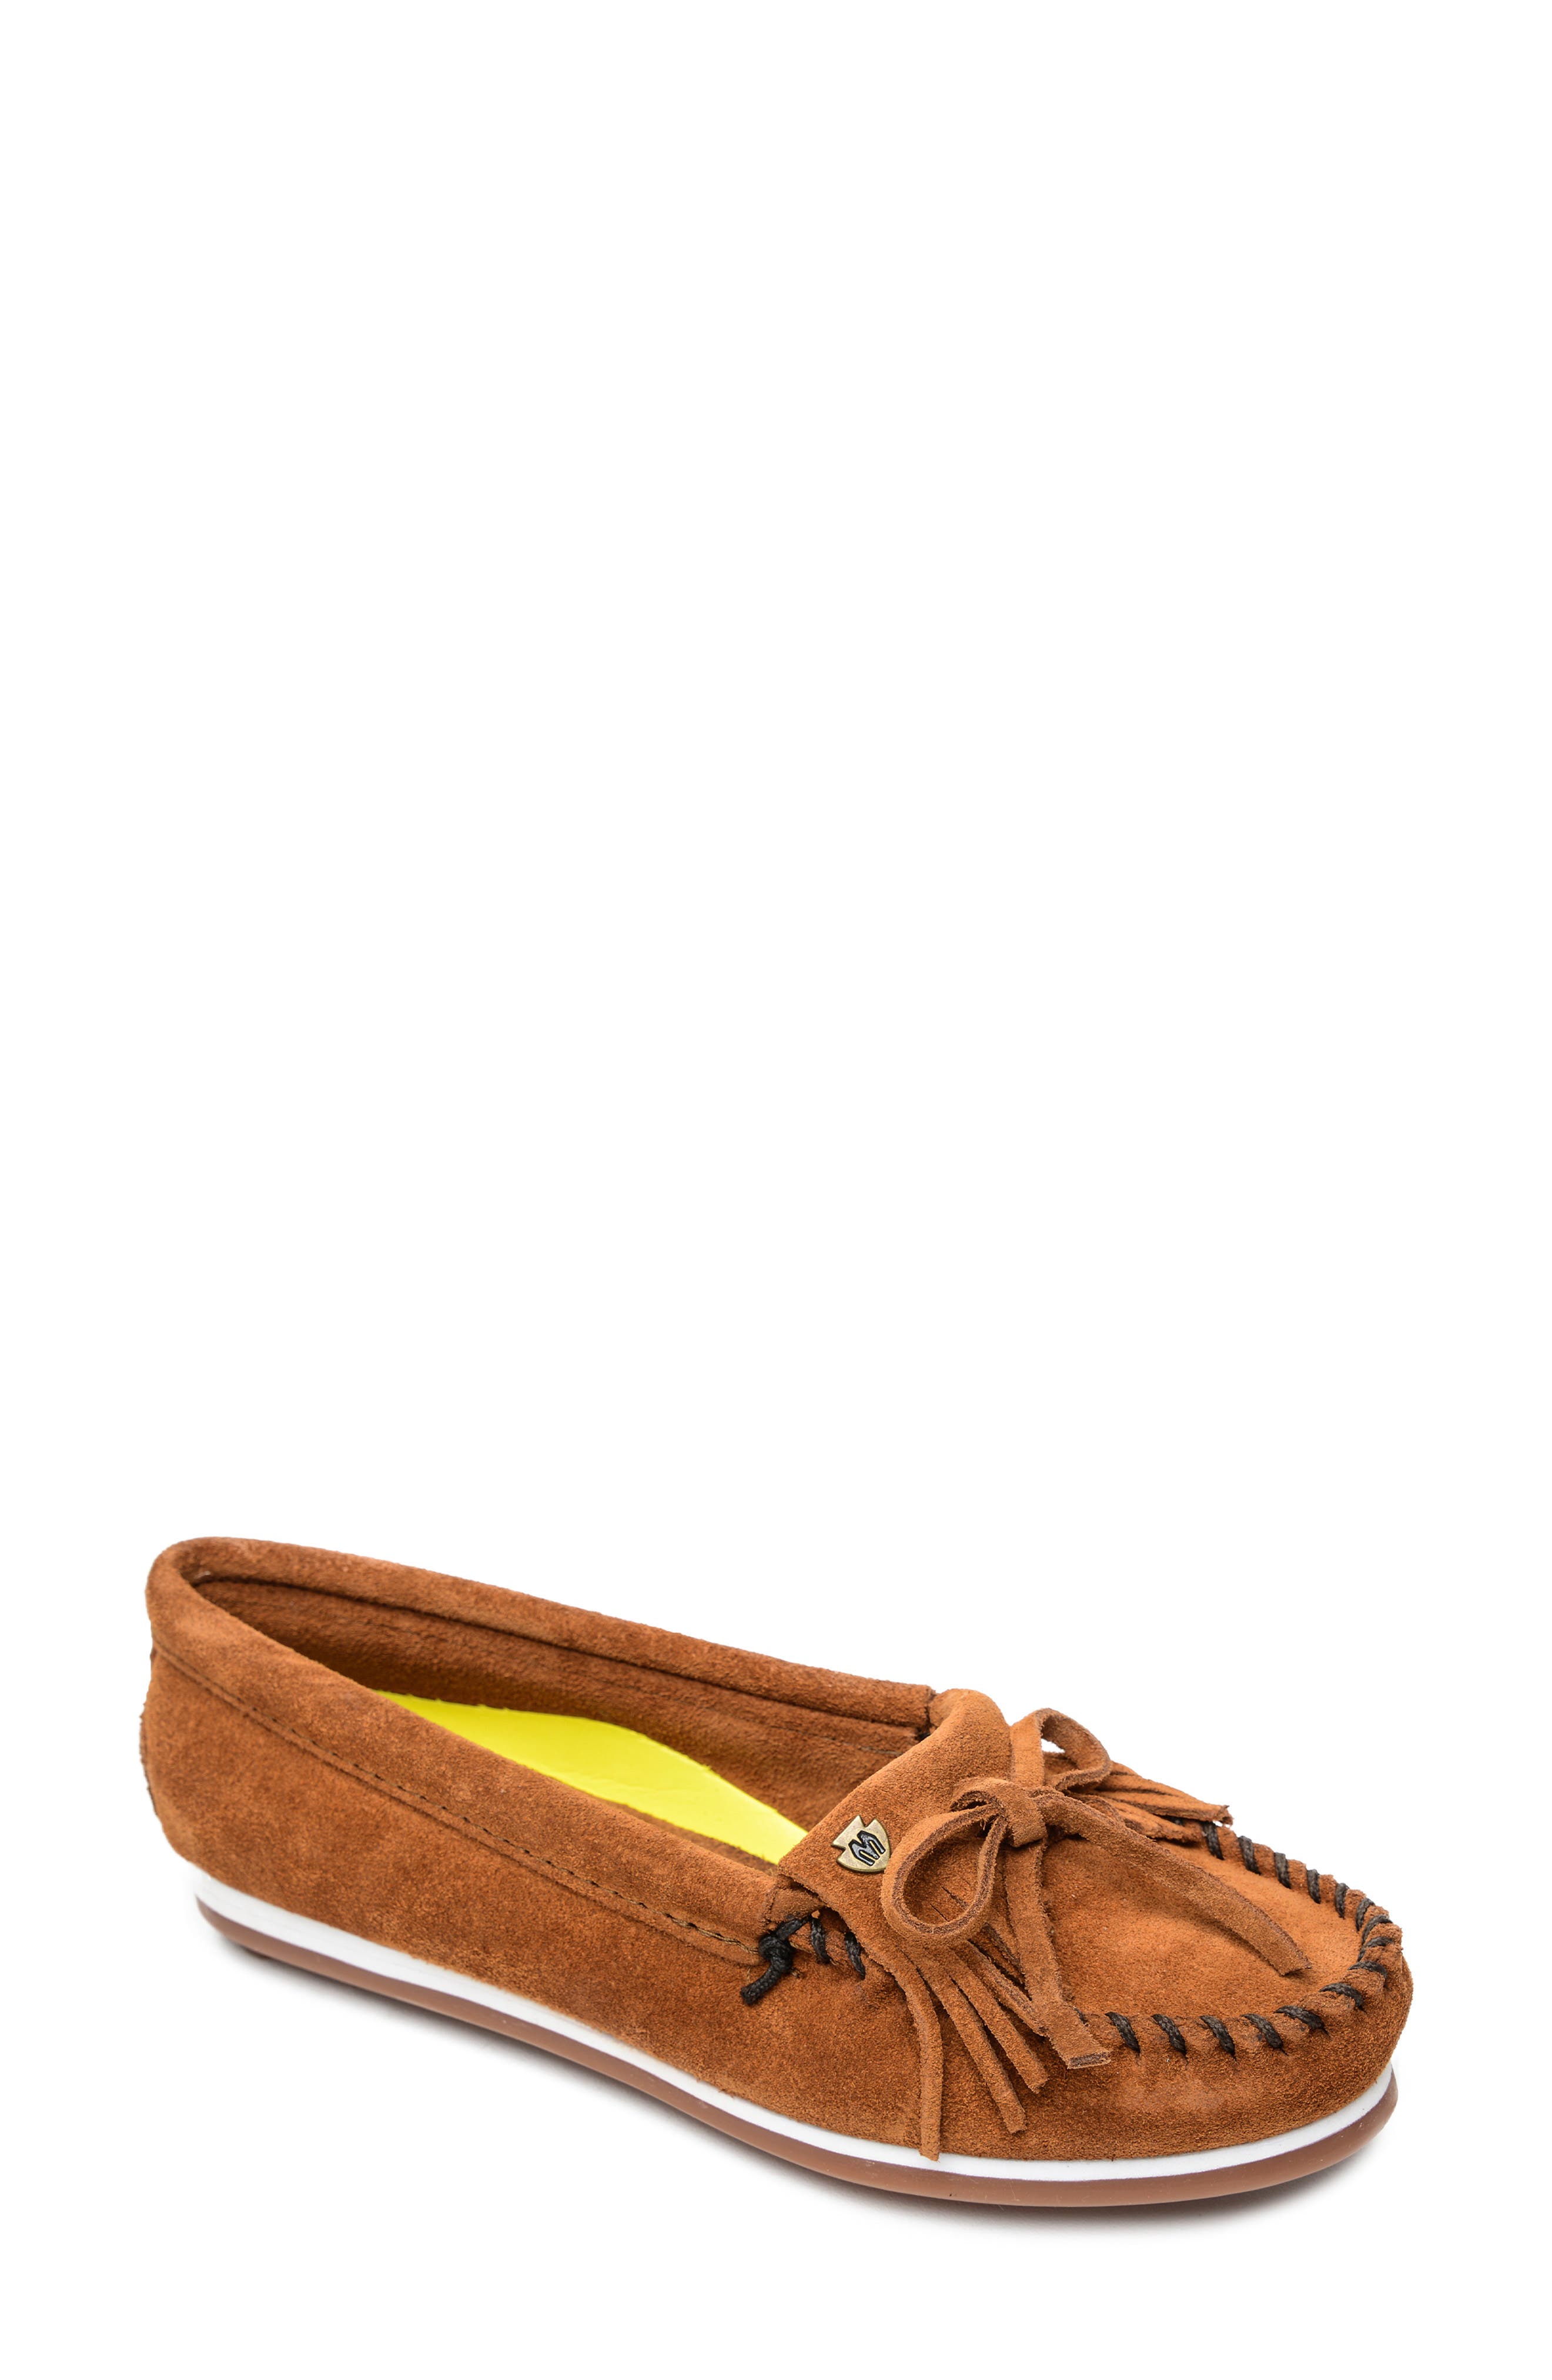 Moccasins All Women | Nordstrom